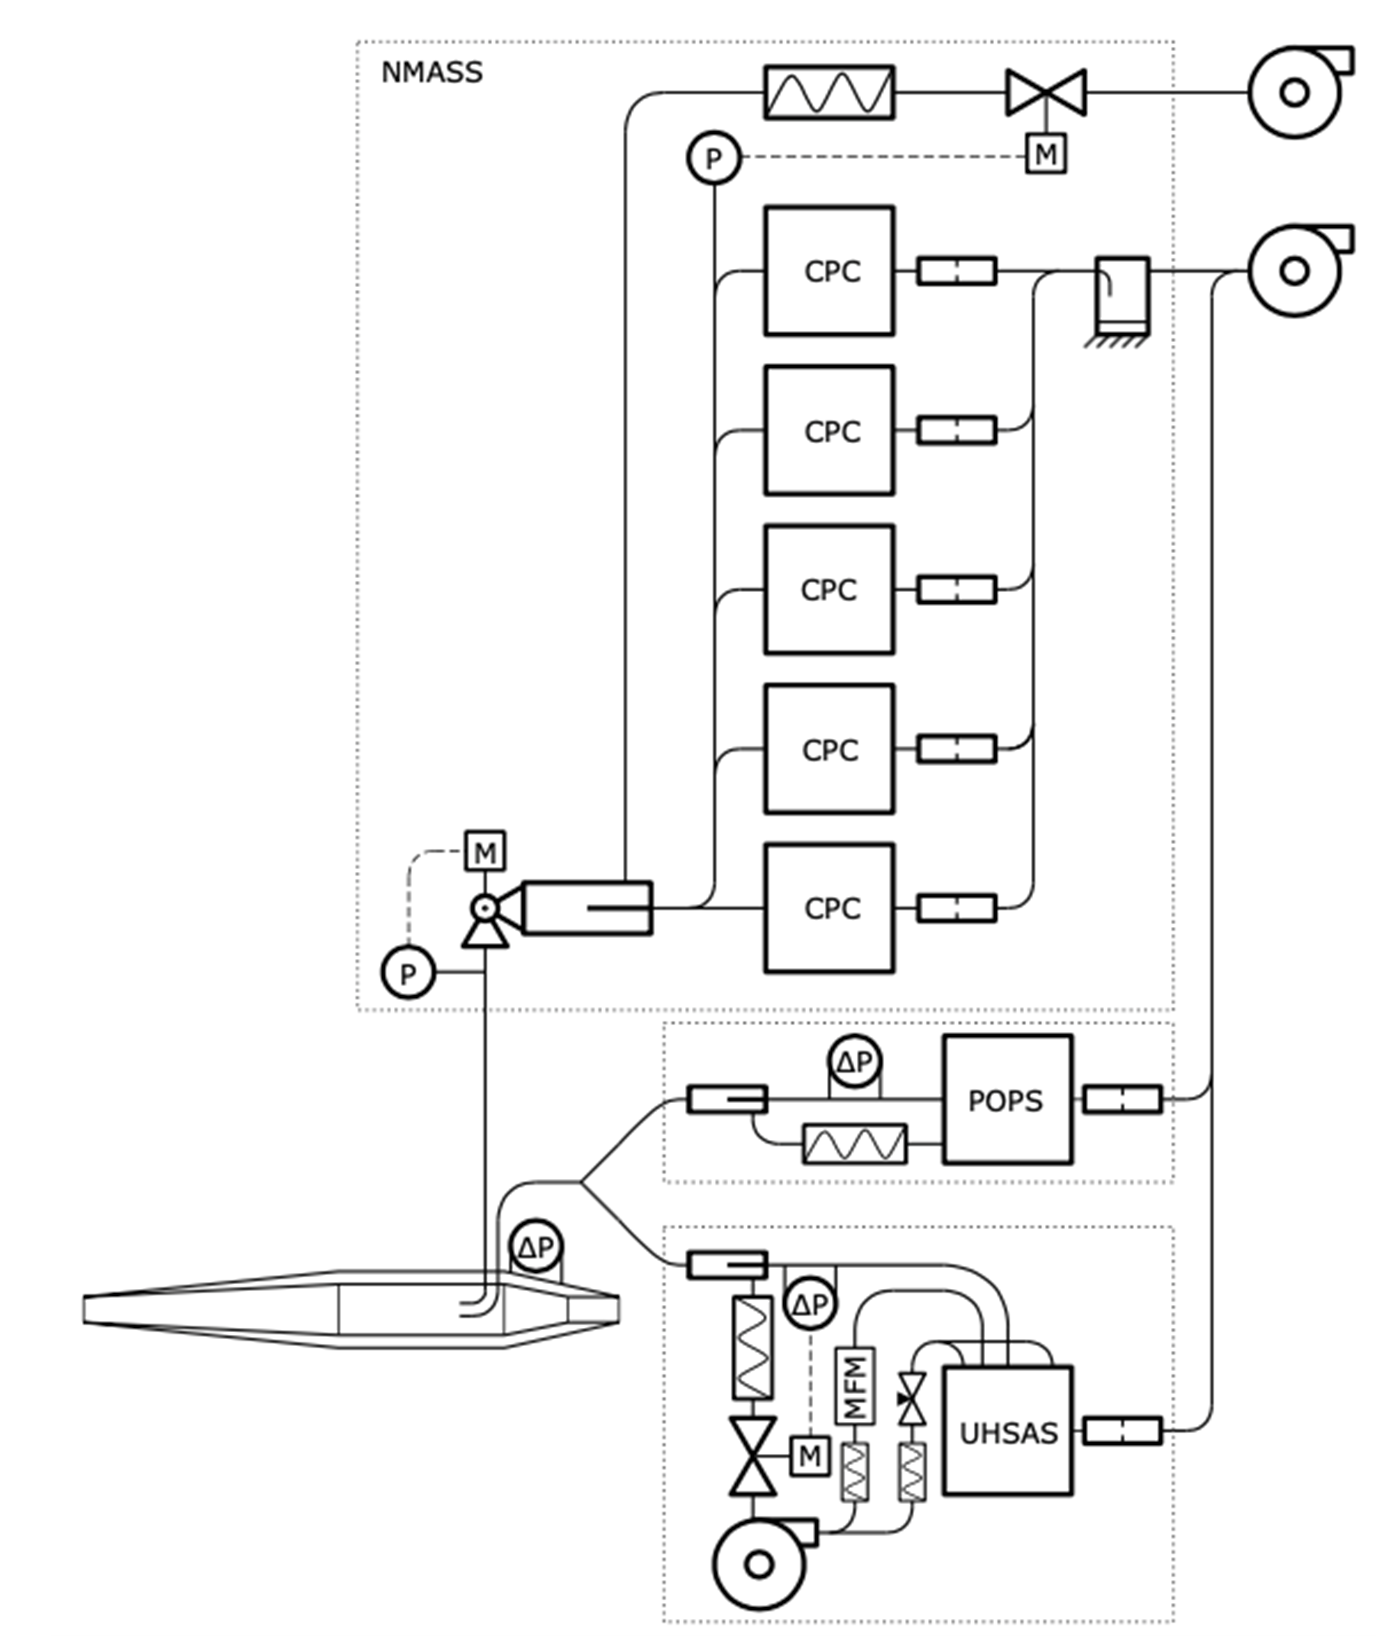 Figure 1: Flow diagram of PUTLS, showing ambient aerosol sample distribution from the aircraft inlet to the instruments.